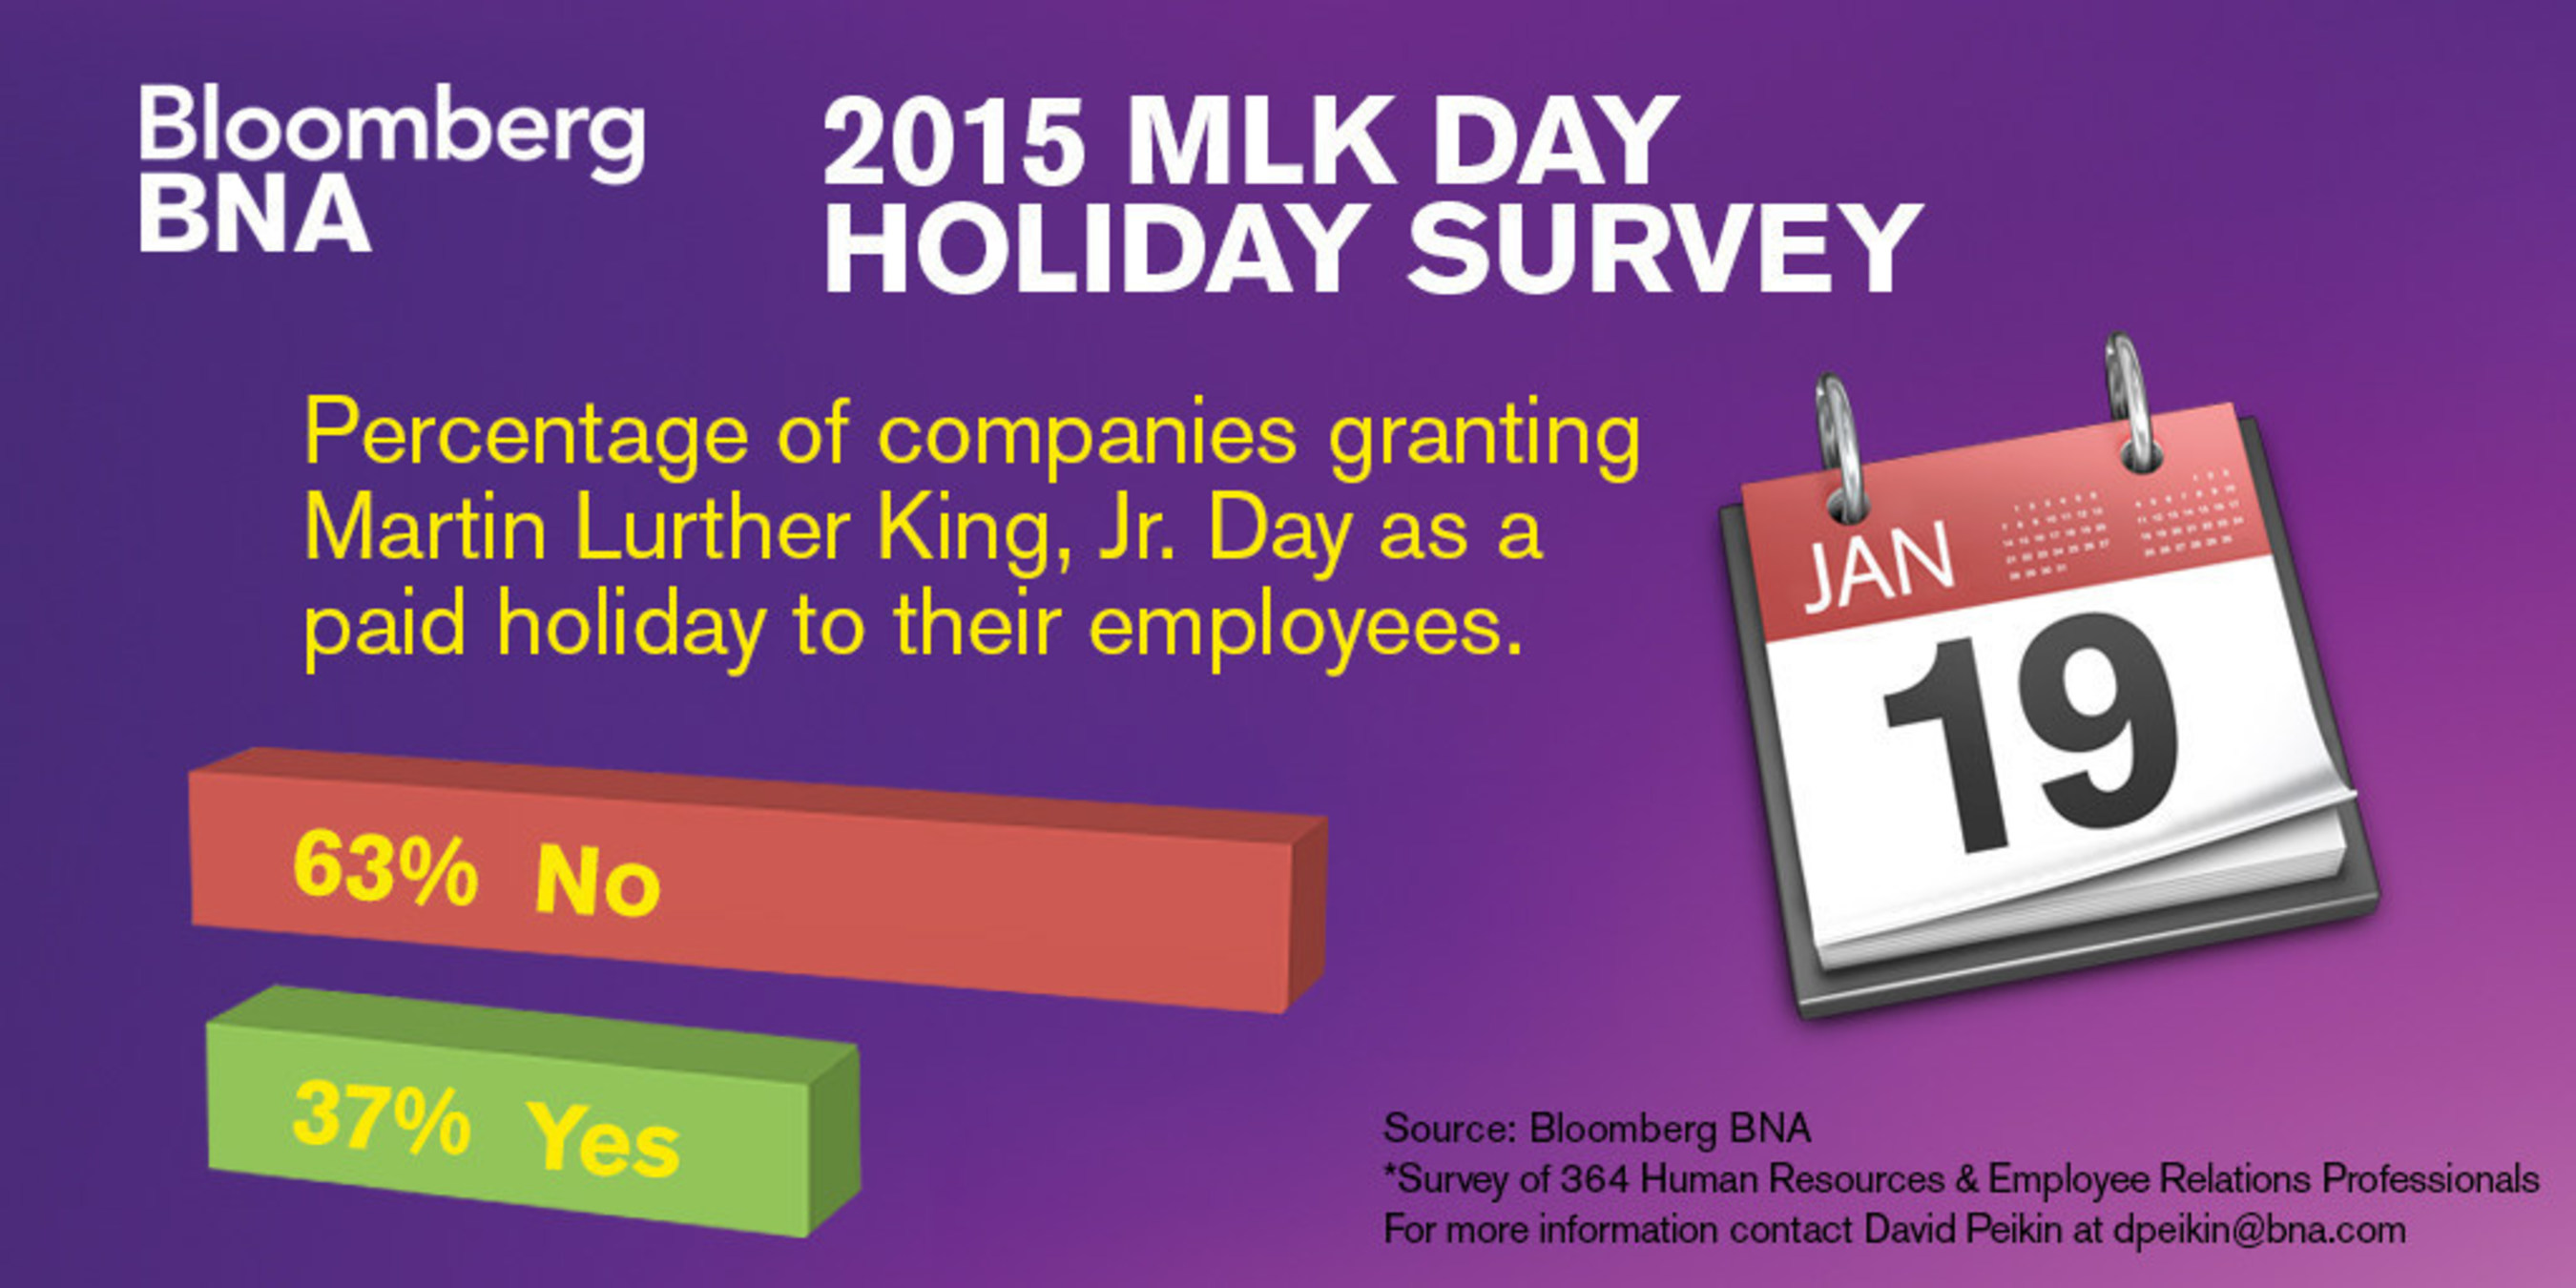 Bloomberg BNA Survey Finds Paid Day Off for Martin Luther King, Jr. Holiday Remains the Exception, Not the Norm